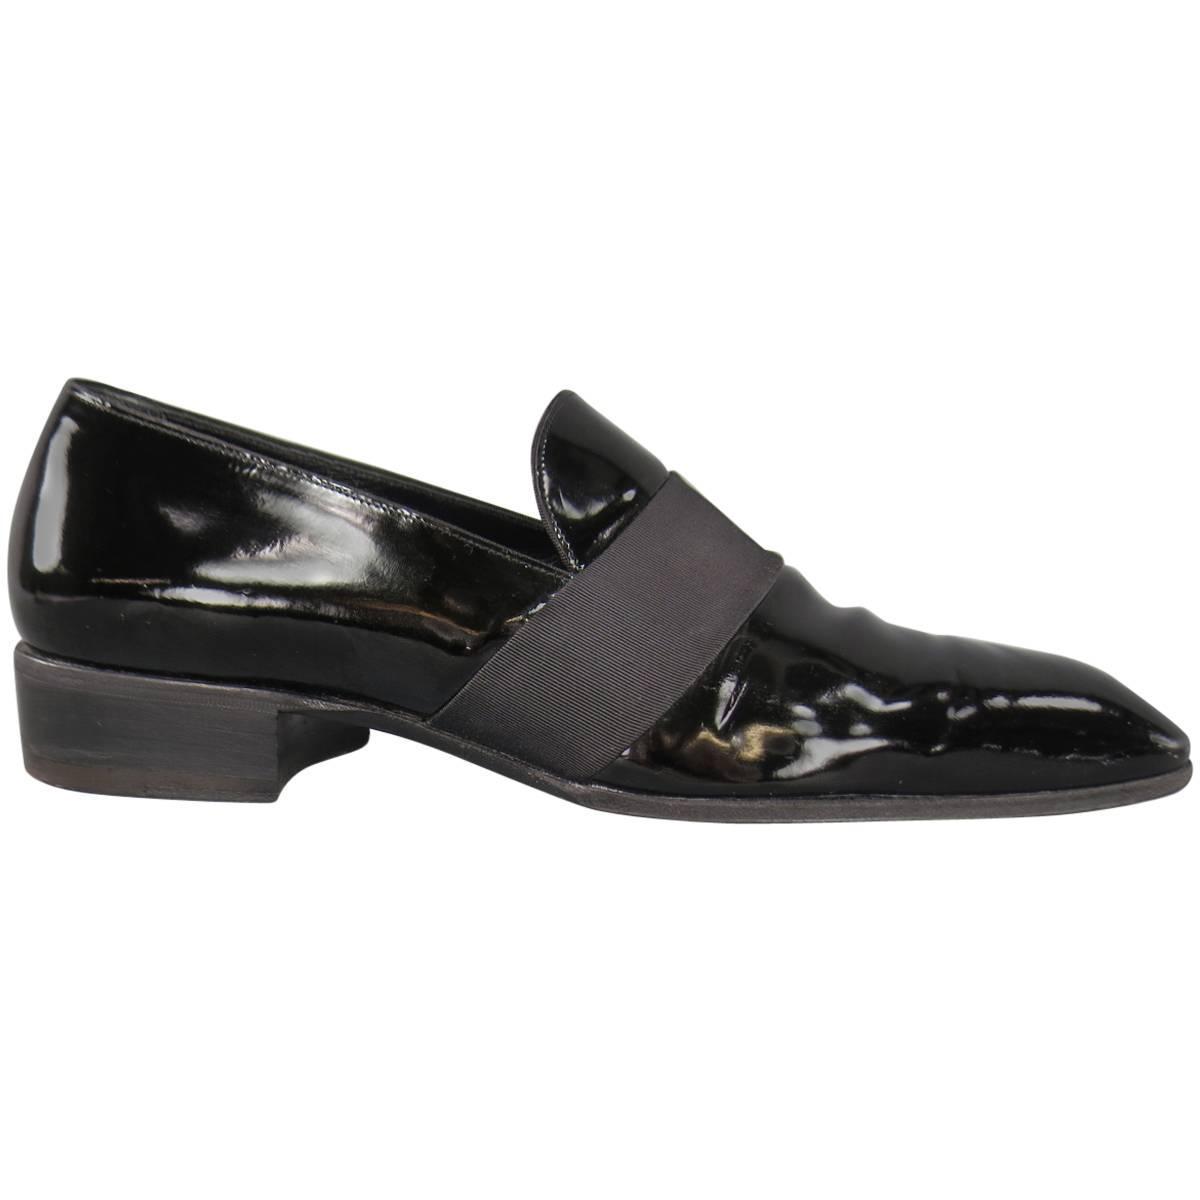 Men's TOM FORD Size 9 Black Patent Leather Ribbon Band Tuxedo Loafers ...